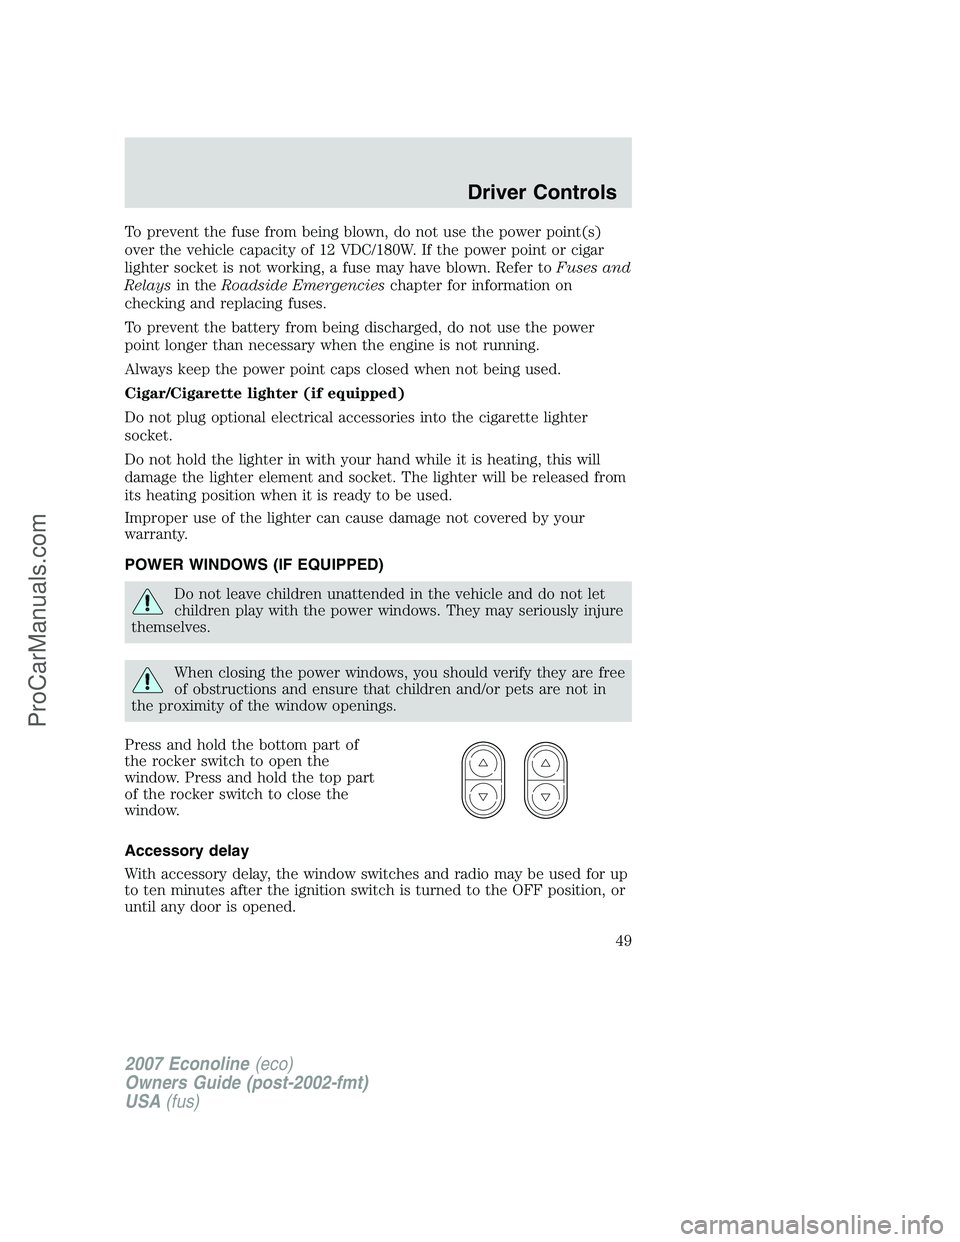 FORD ECONOLINE 2007  Owners Manual To prevent the fuse from being blown, do not use the power point(s)
over the vehicle capacity of 12 VDC/180W. If the power point or cigar
lighter socket is not working, a fuse may have blown. Refer to